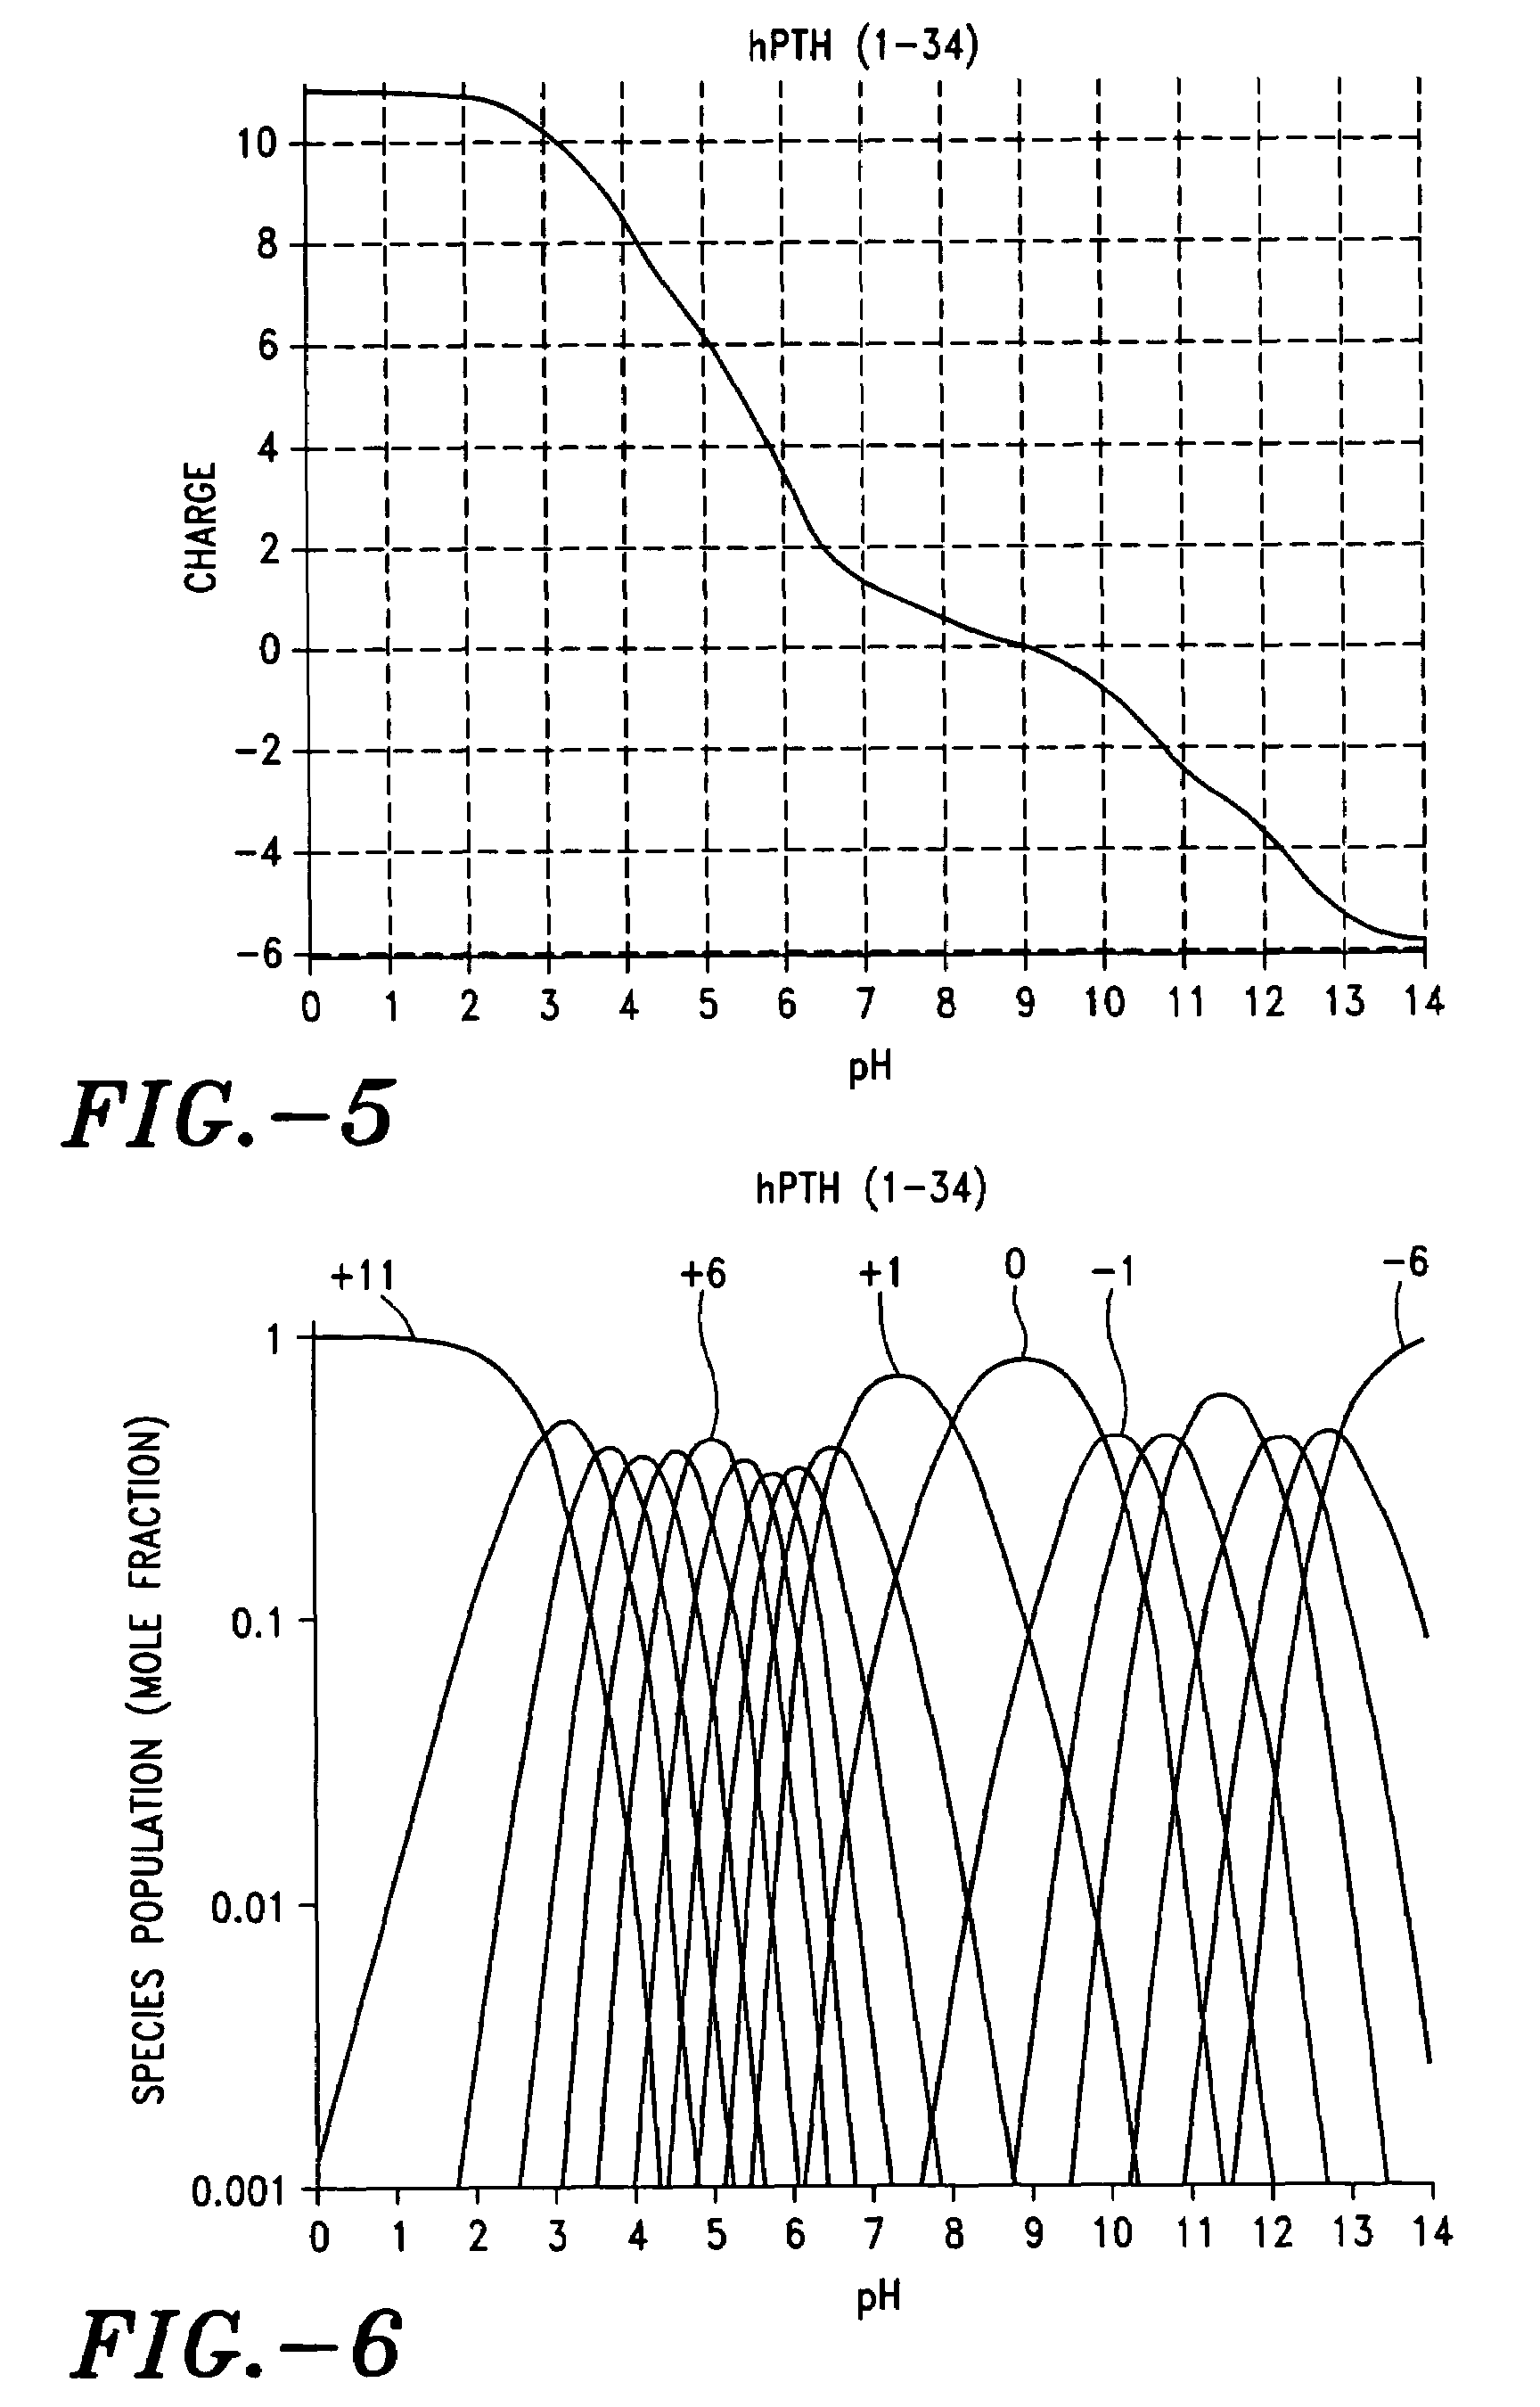 Formulations for coated microprojections containing non-volatile counterions